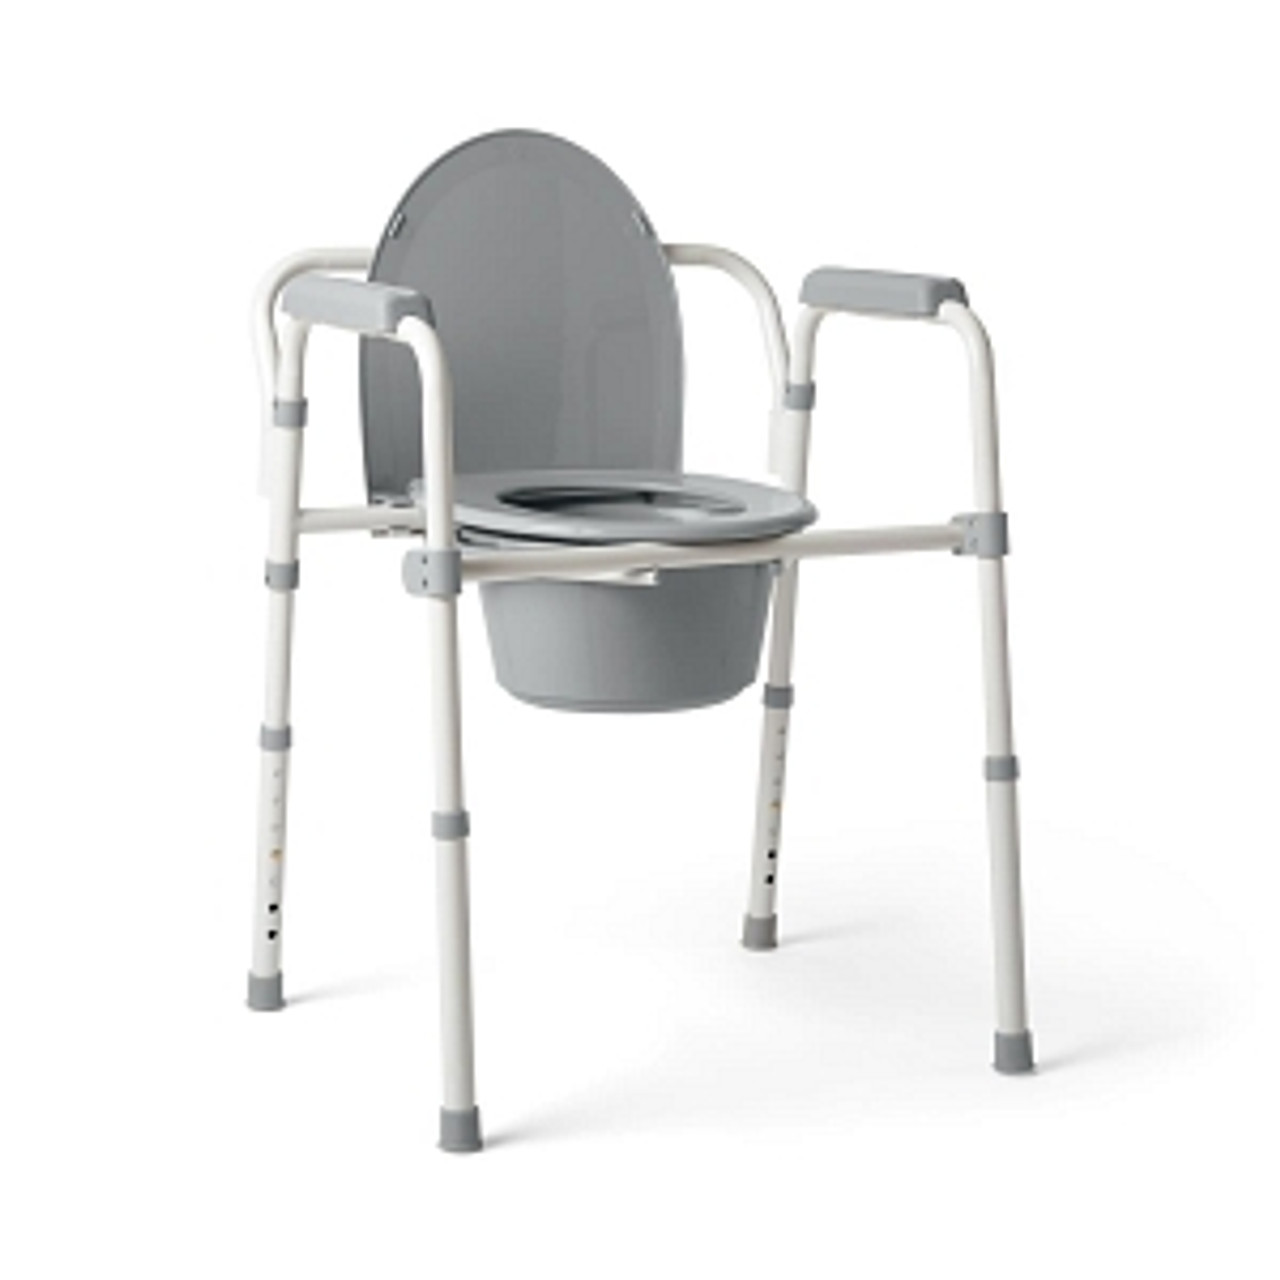 Comes with seat, lid and bucket, and splash guard
350 lb. weight capacity, 14.5" seat depth, 19" width between arms, 21" overall width
Does not come in retail packaging